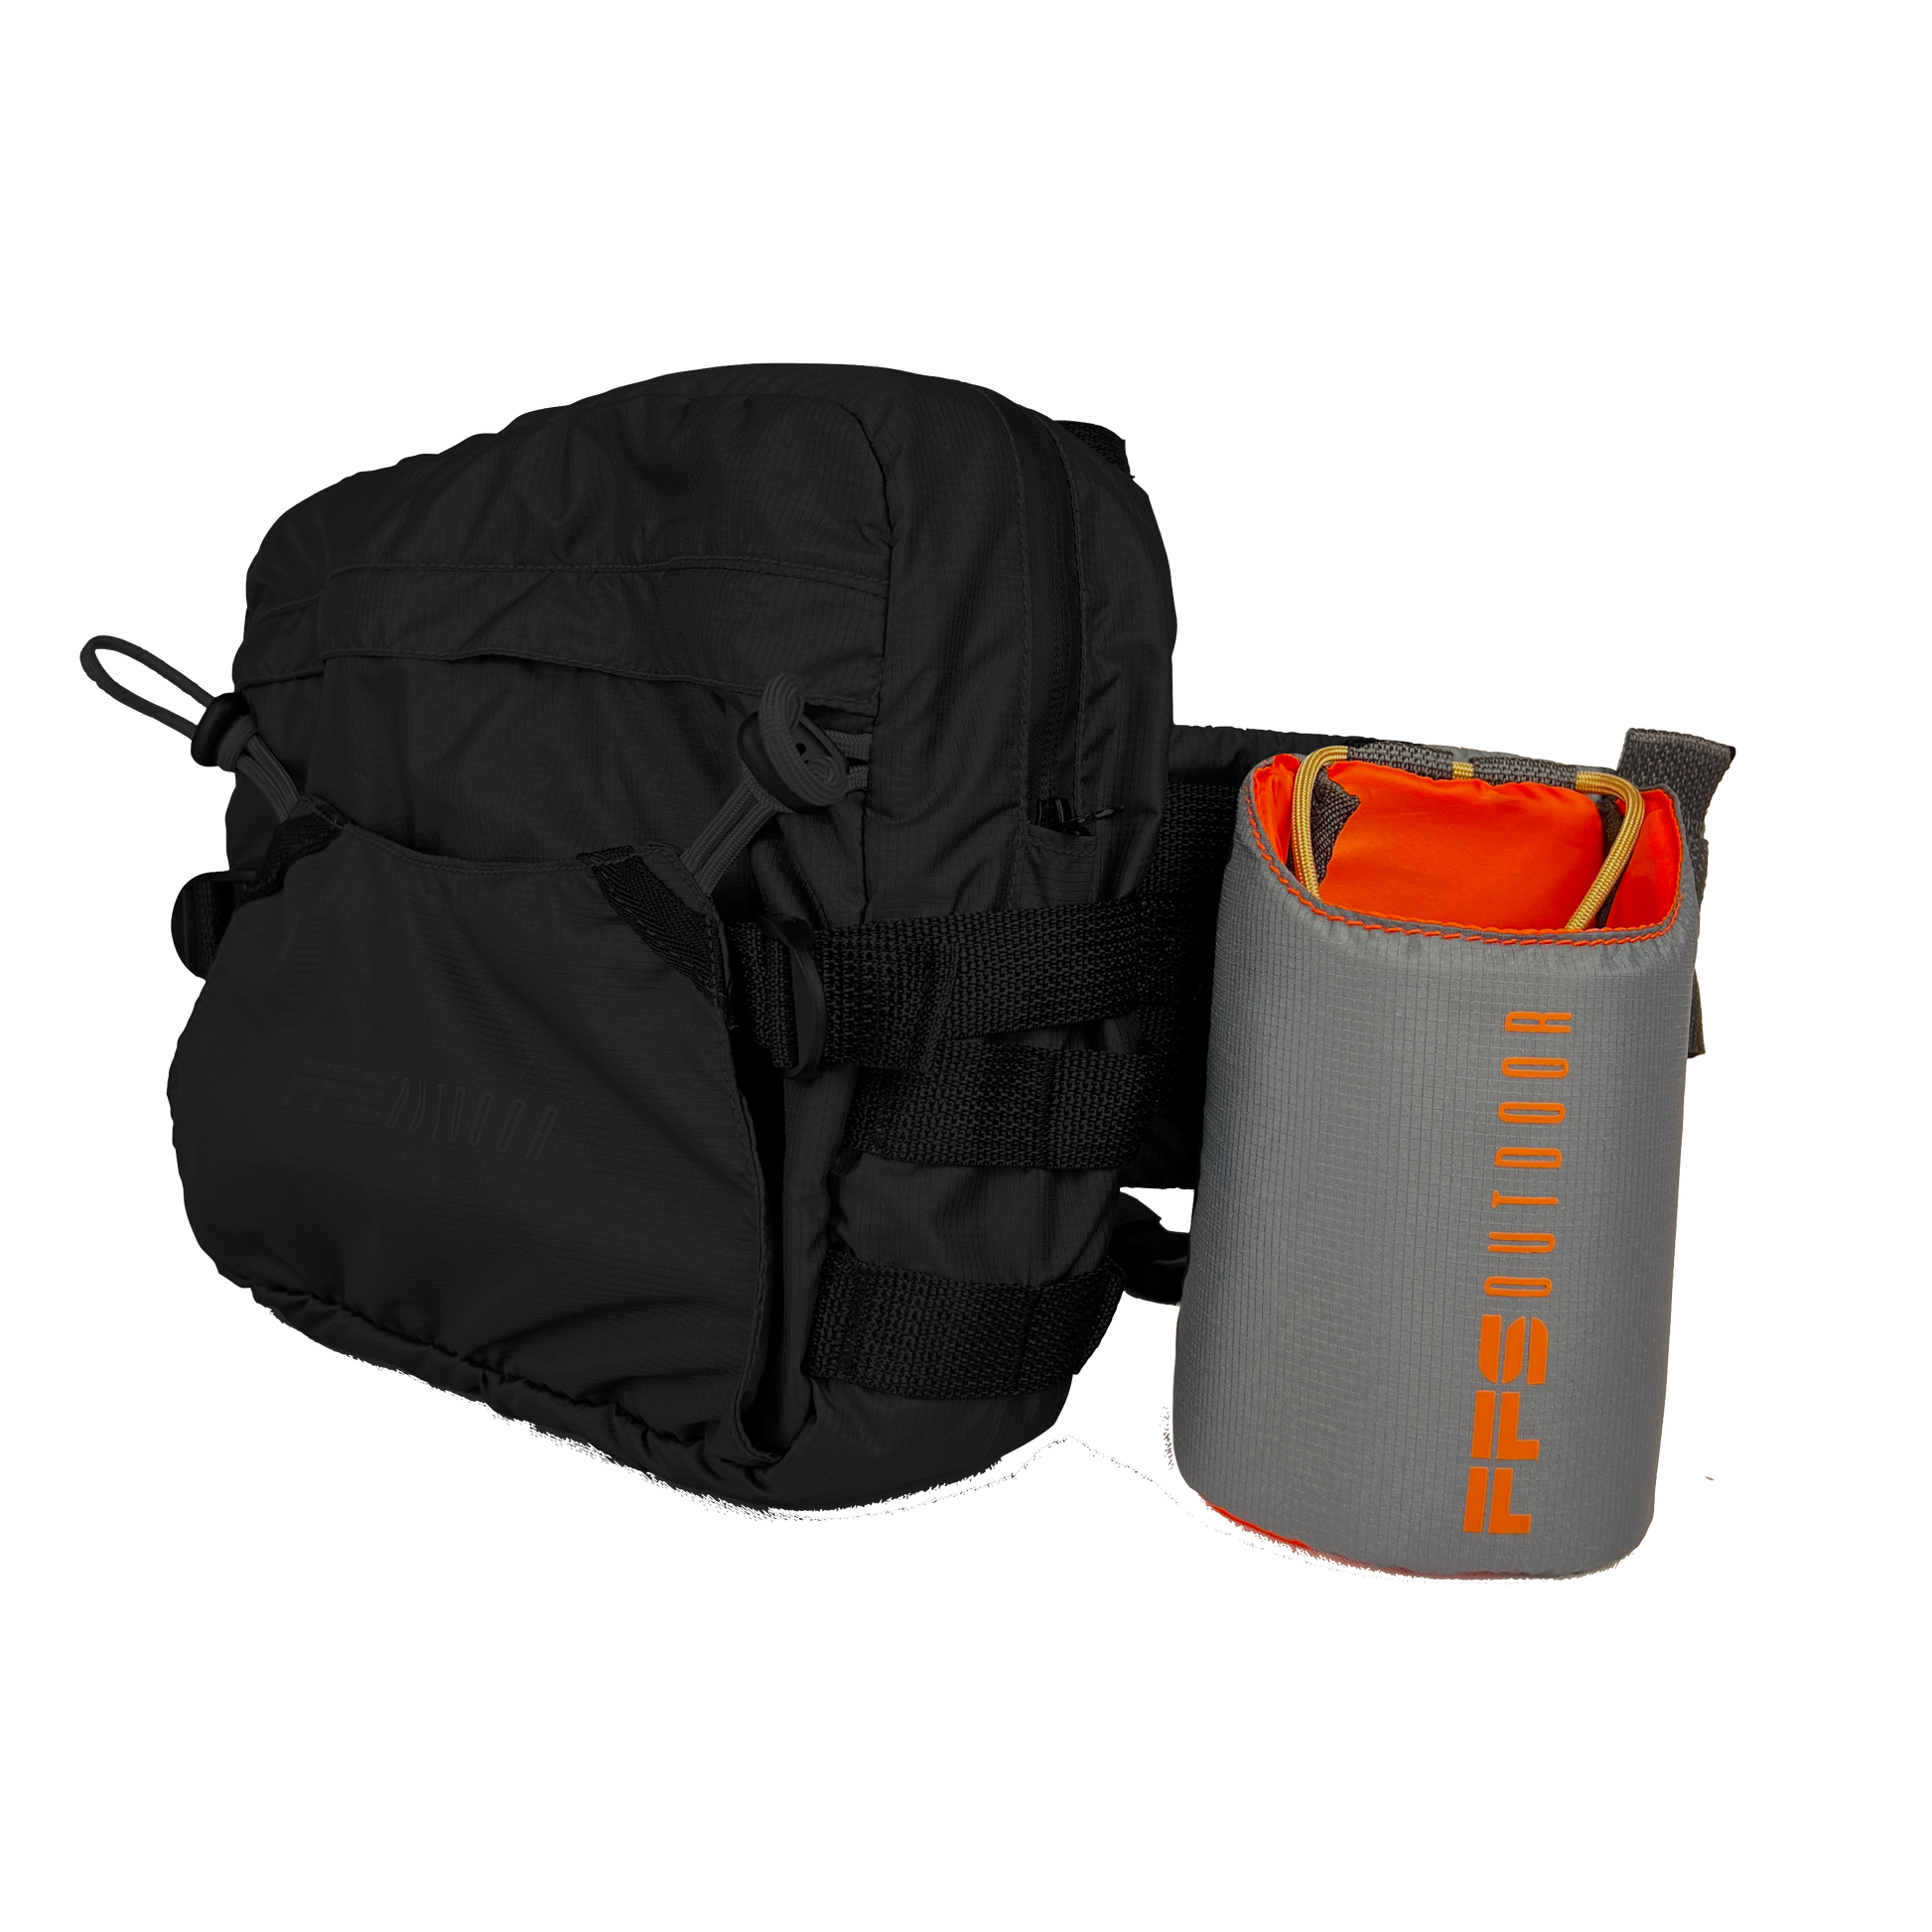 Fanny lumbar gear bag for fishing and hunting with hydration bag